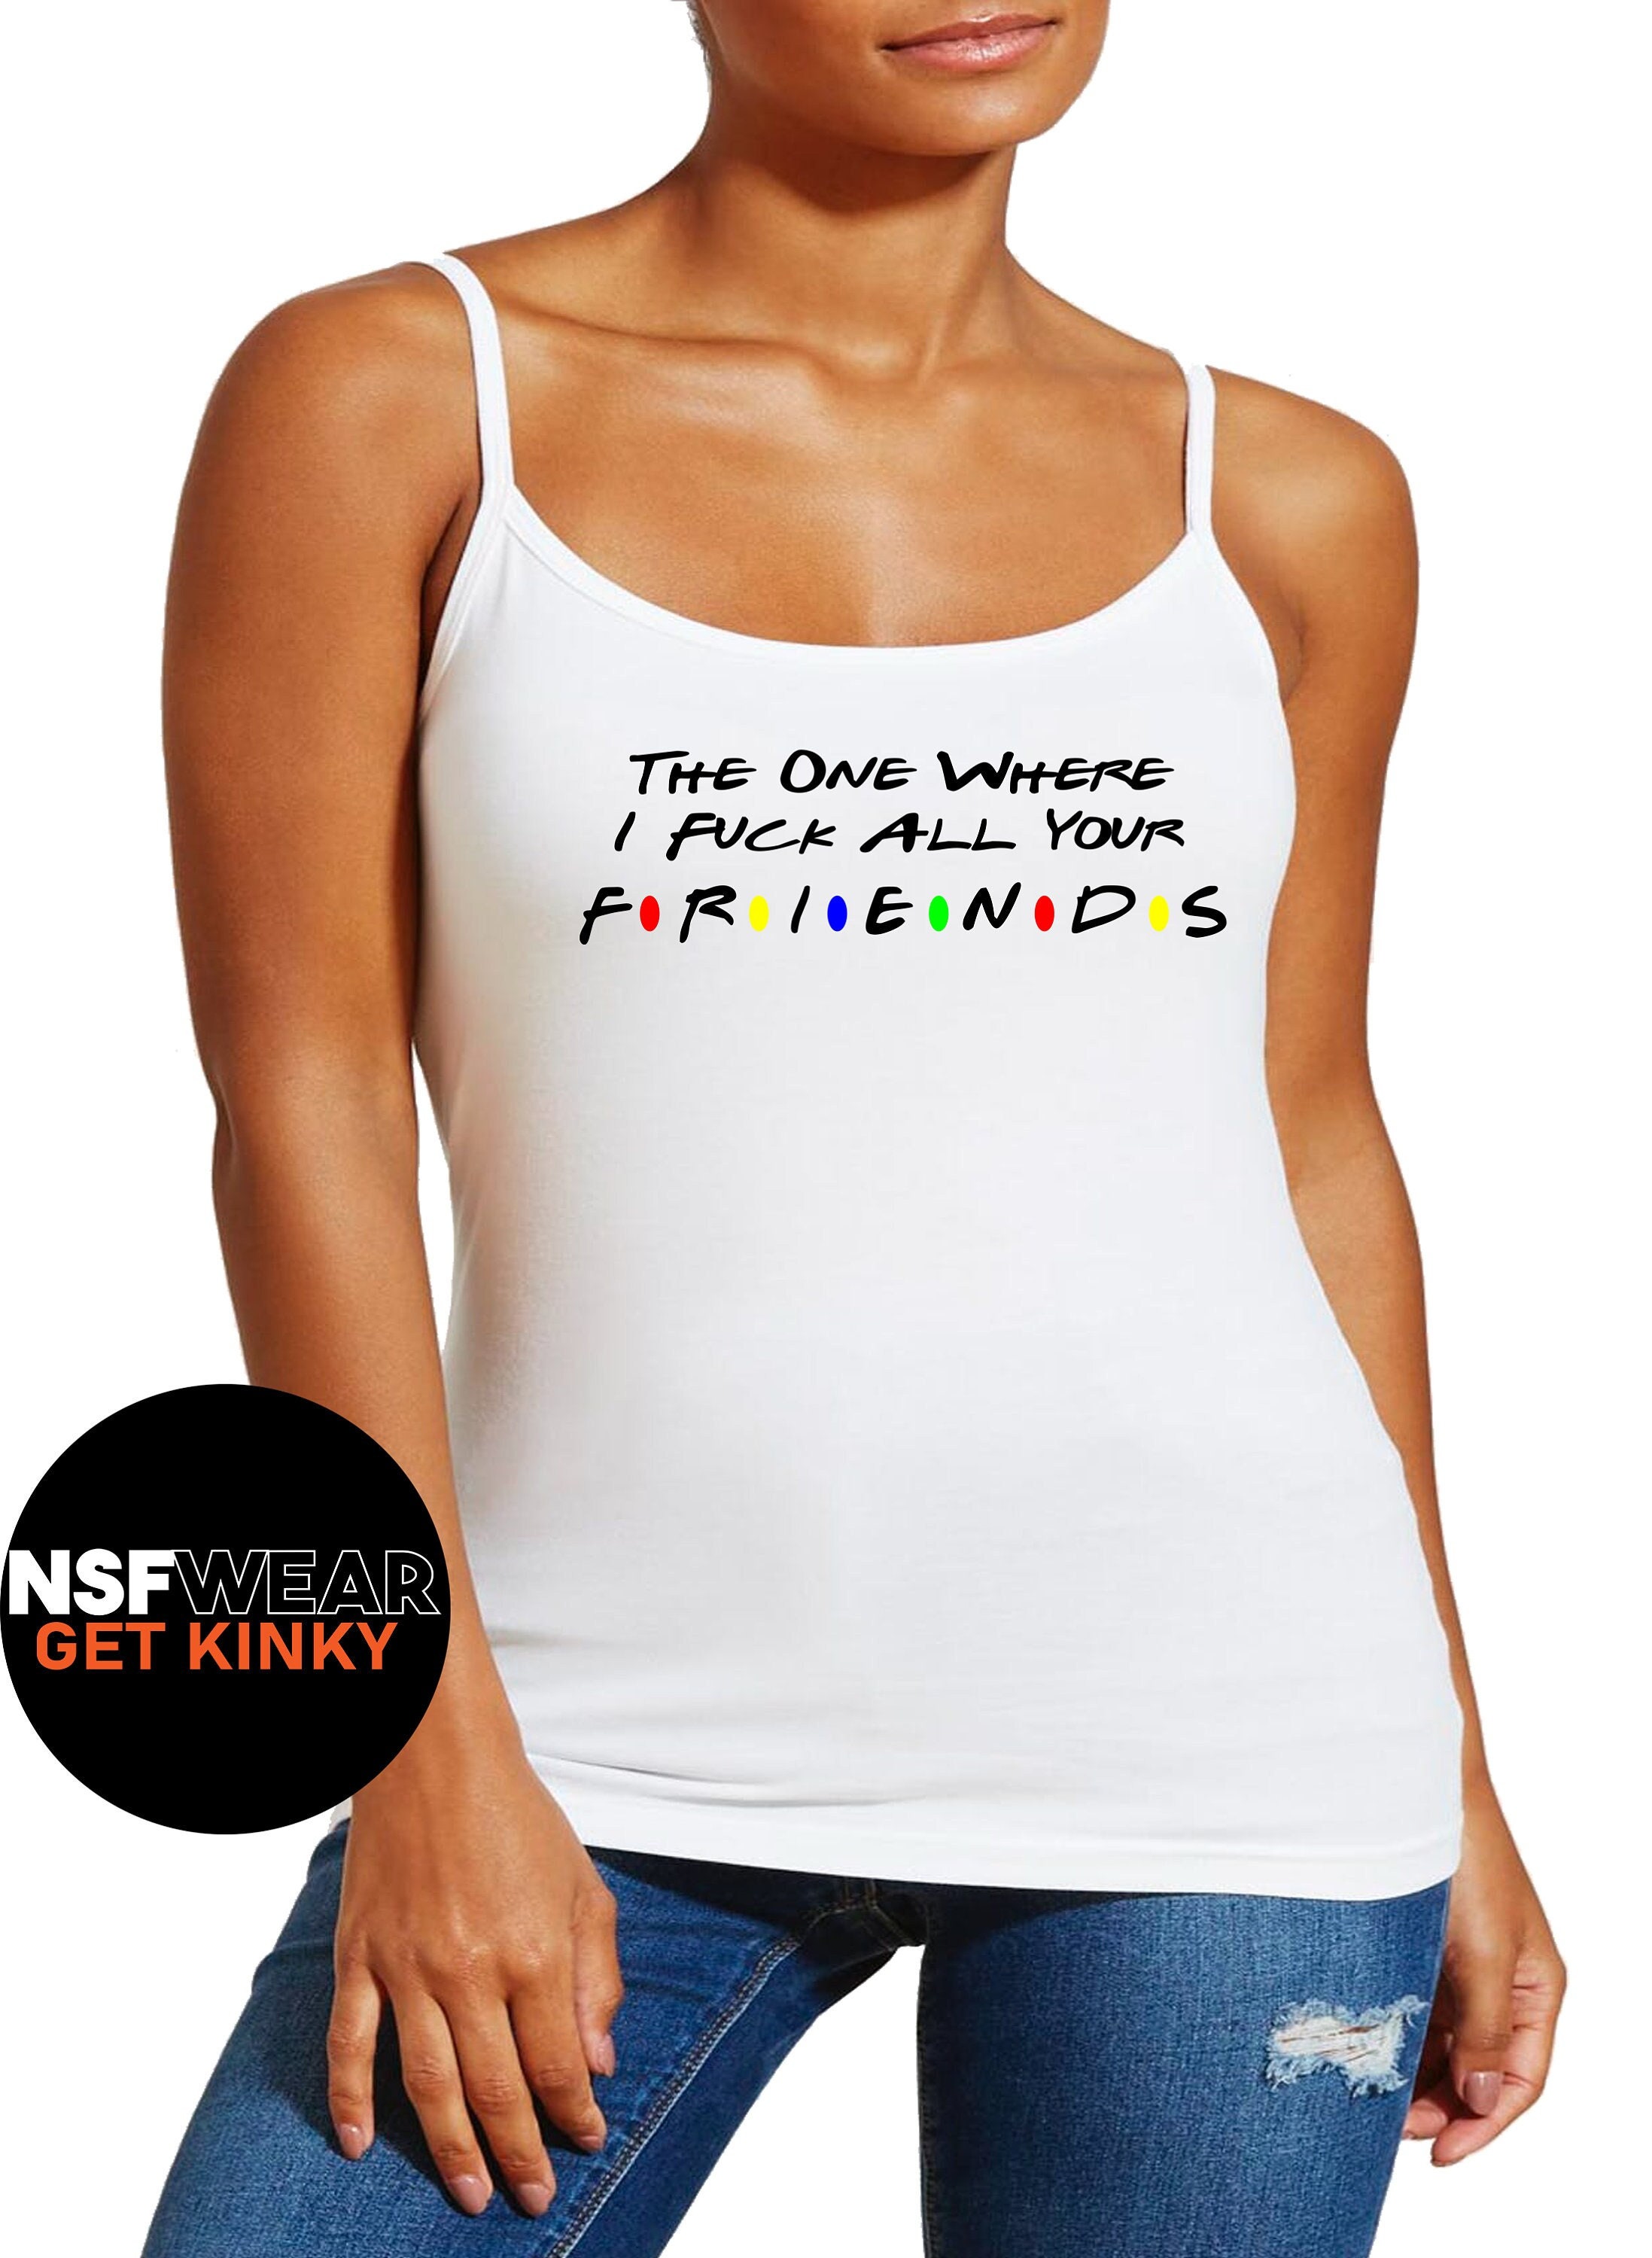 The One Where I Fuck All Your Friends T-shirt Tanktop Cami image